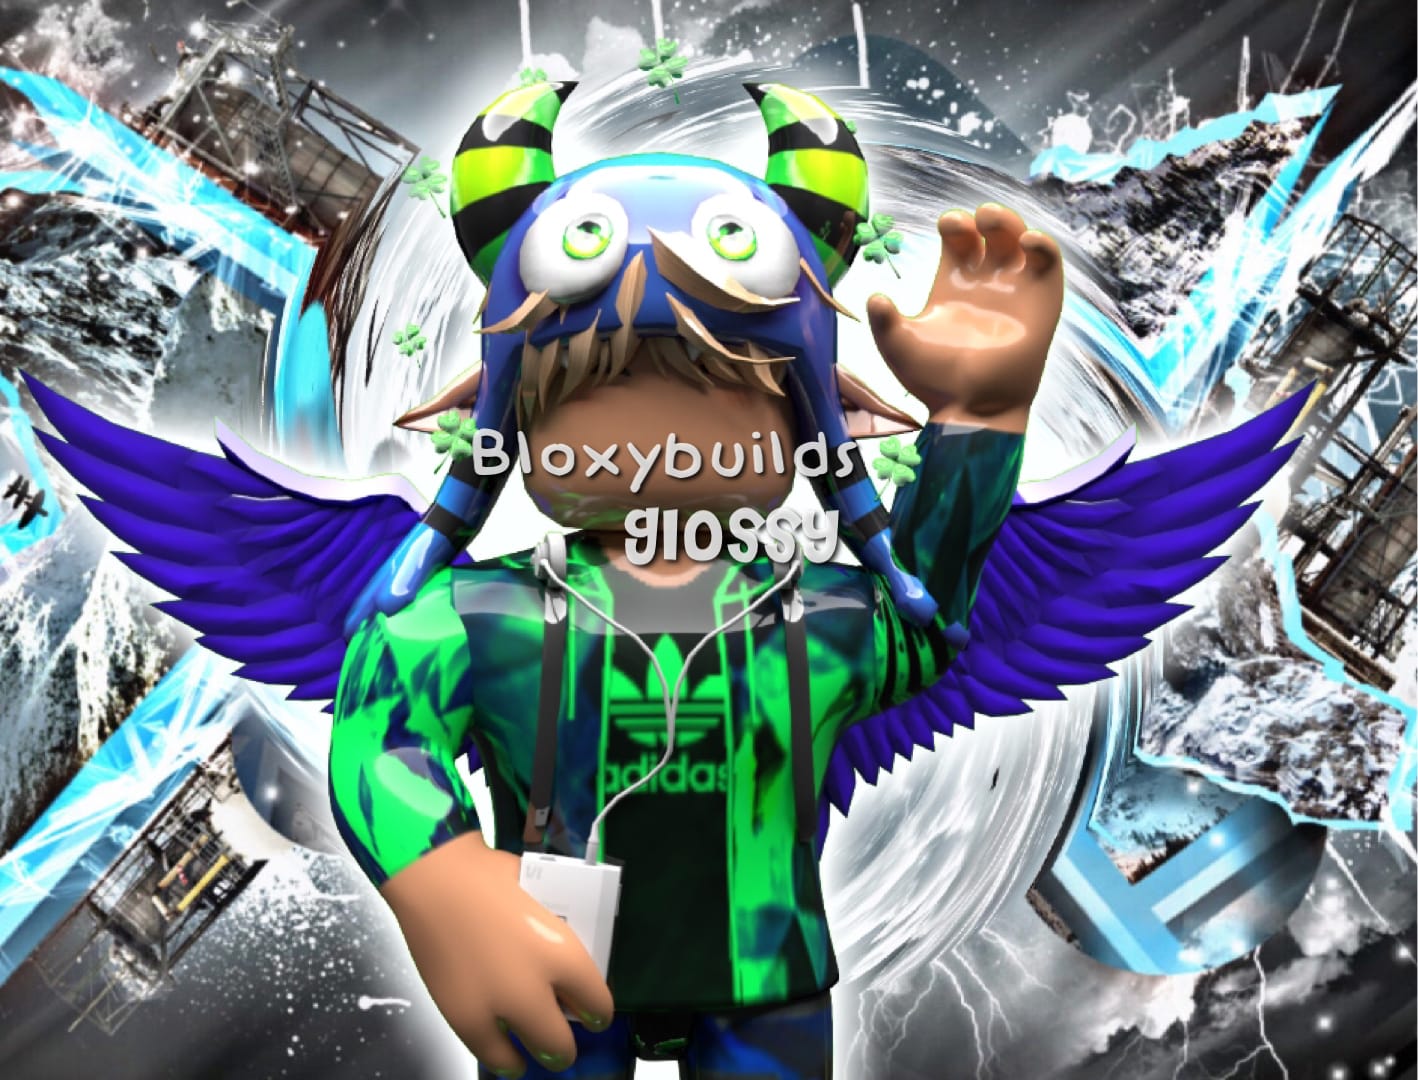 Make a glossy roblox gfx personalised for your roblox avatar by